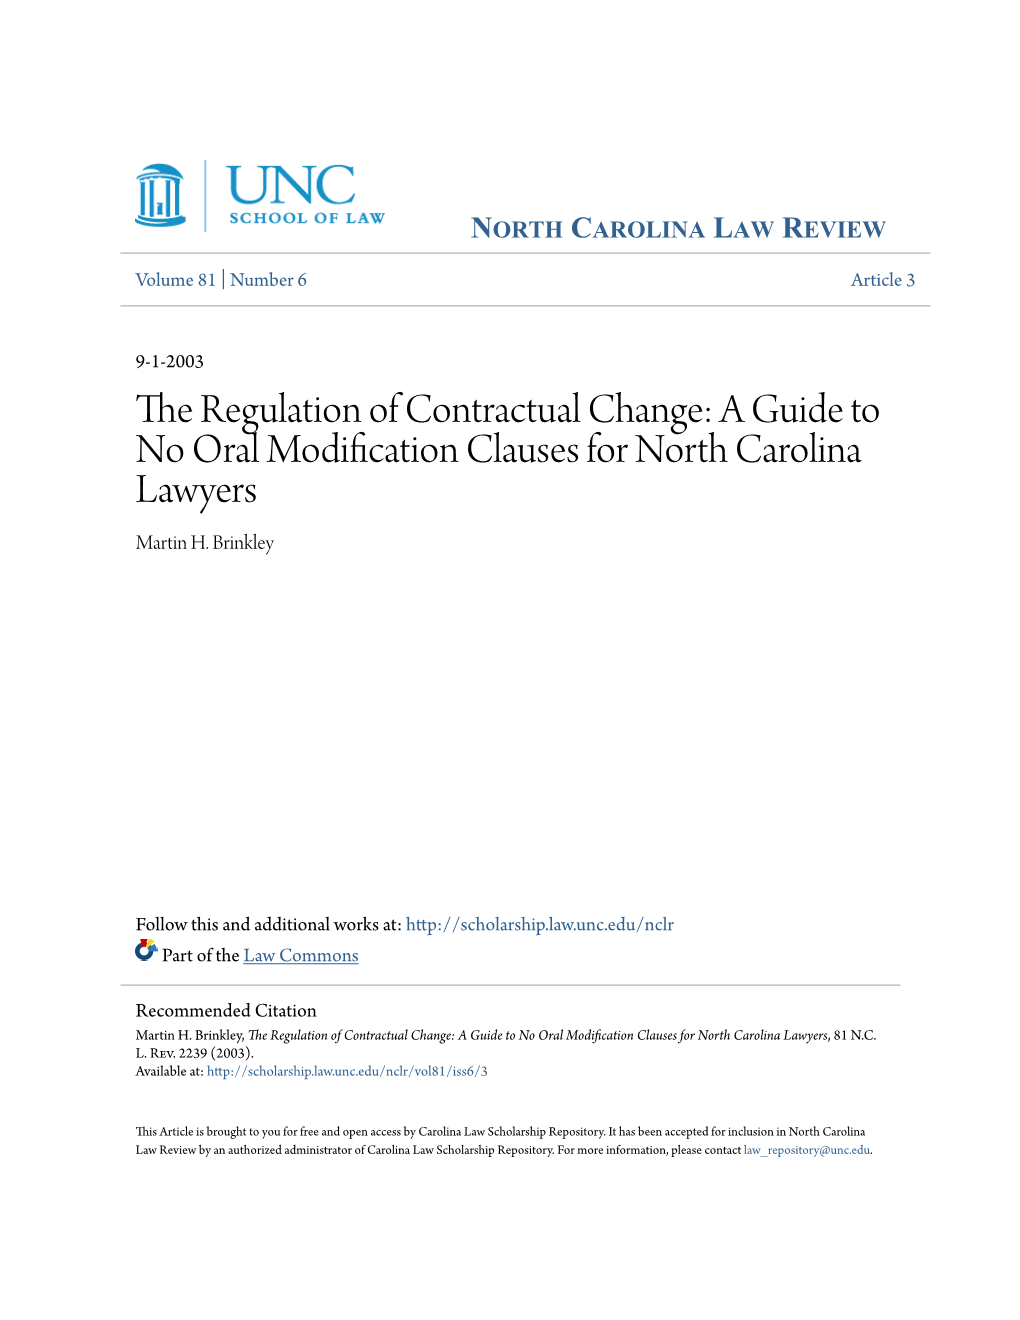 A Guide to No Oral Modification Clauses for North Carolina Lawyers Martin H